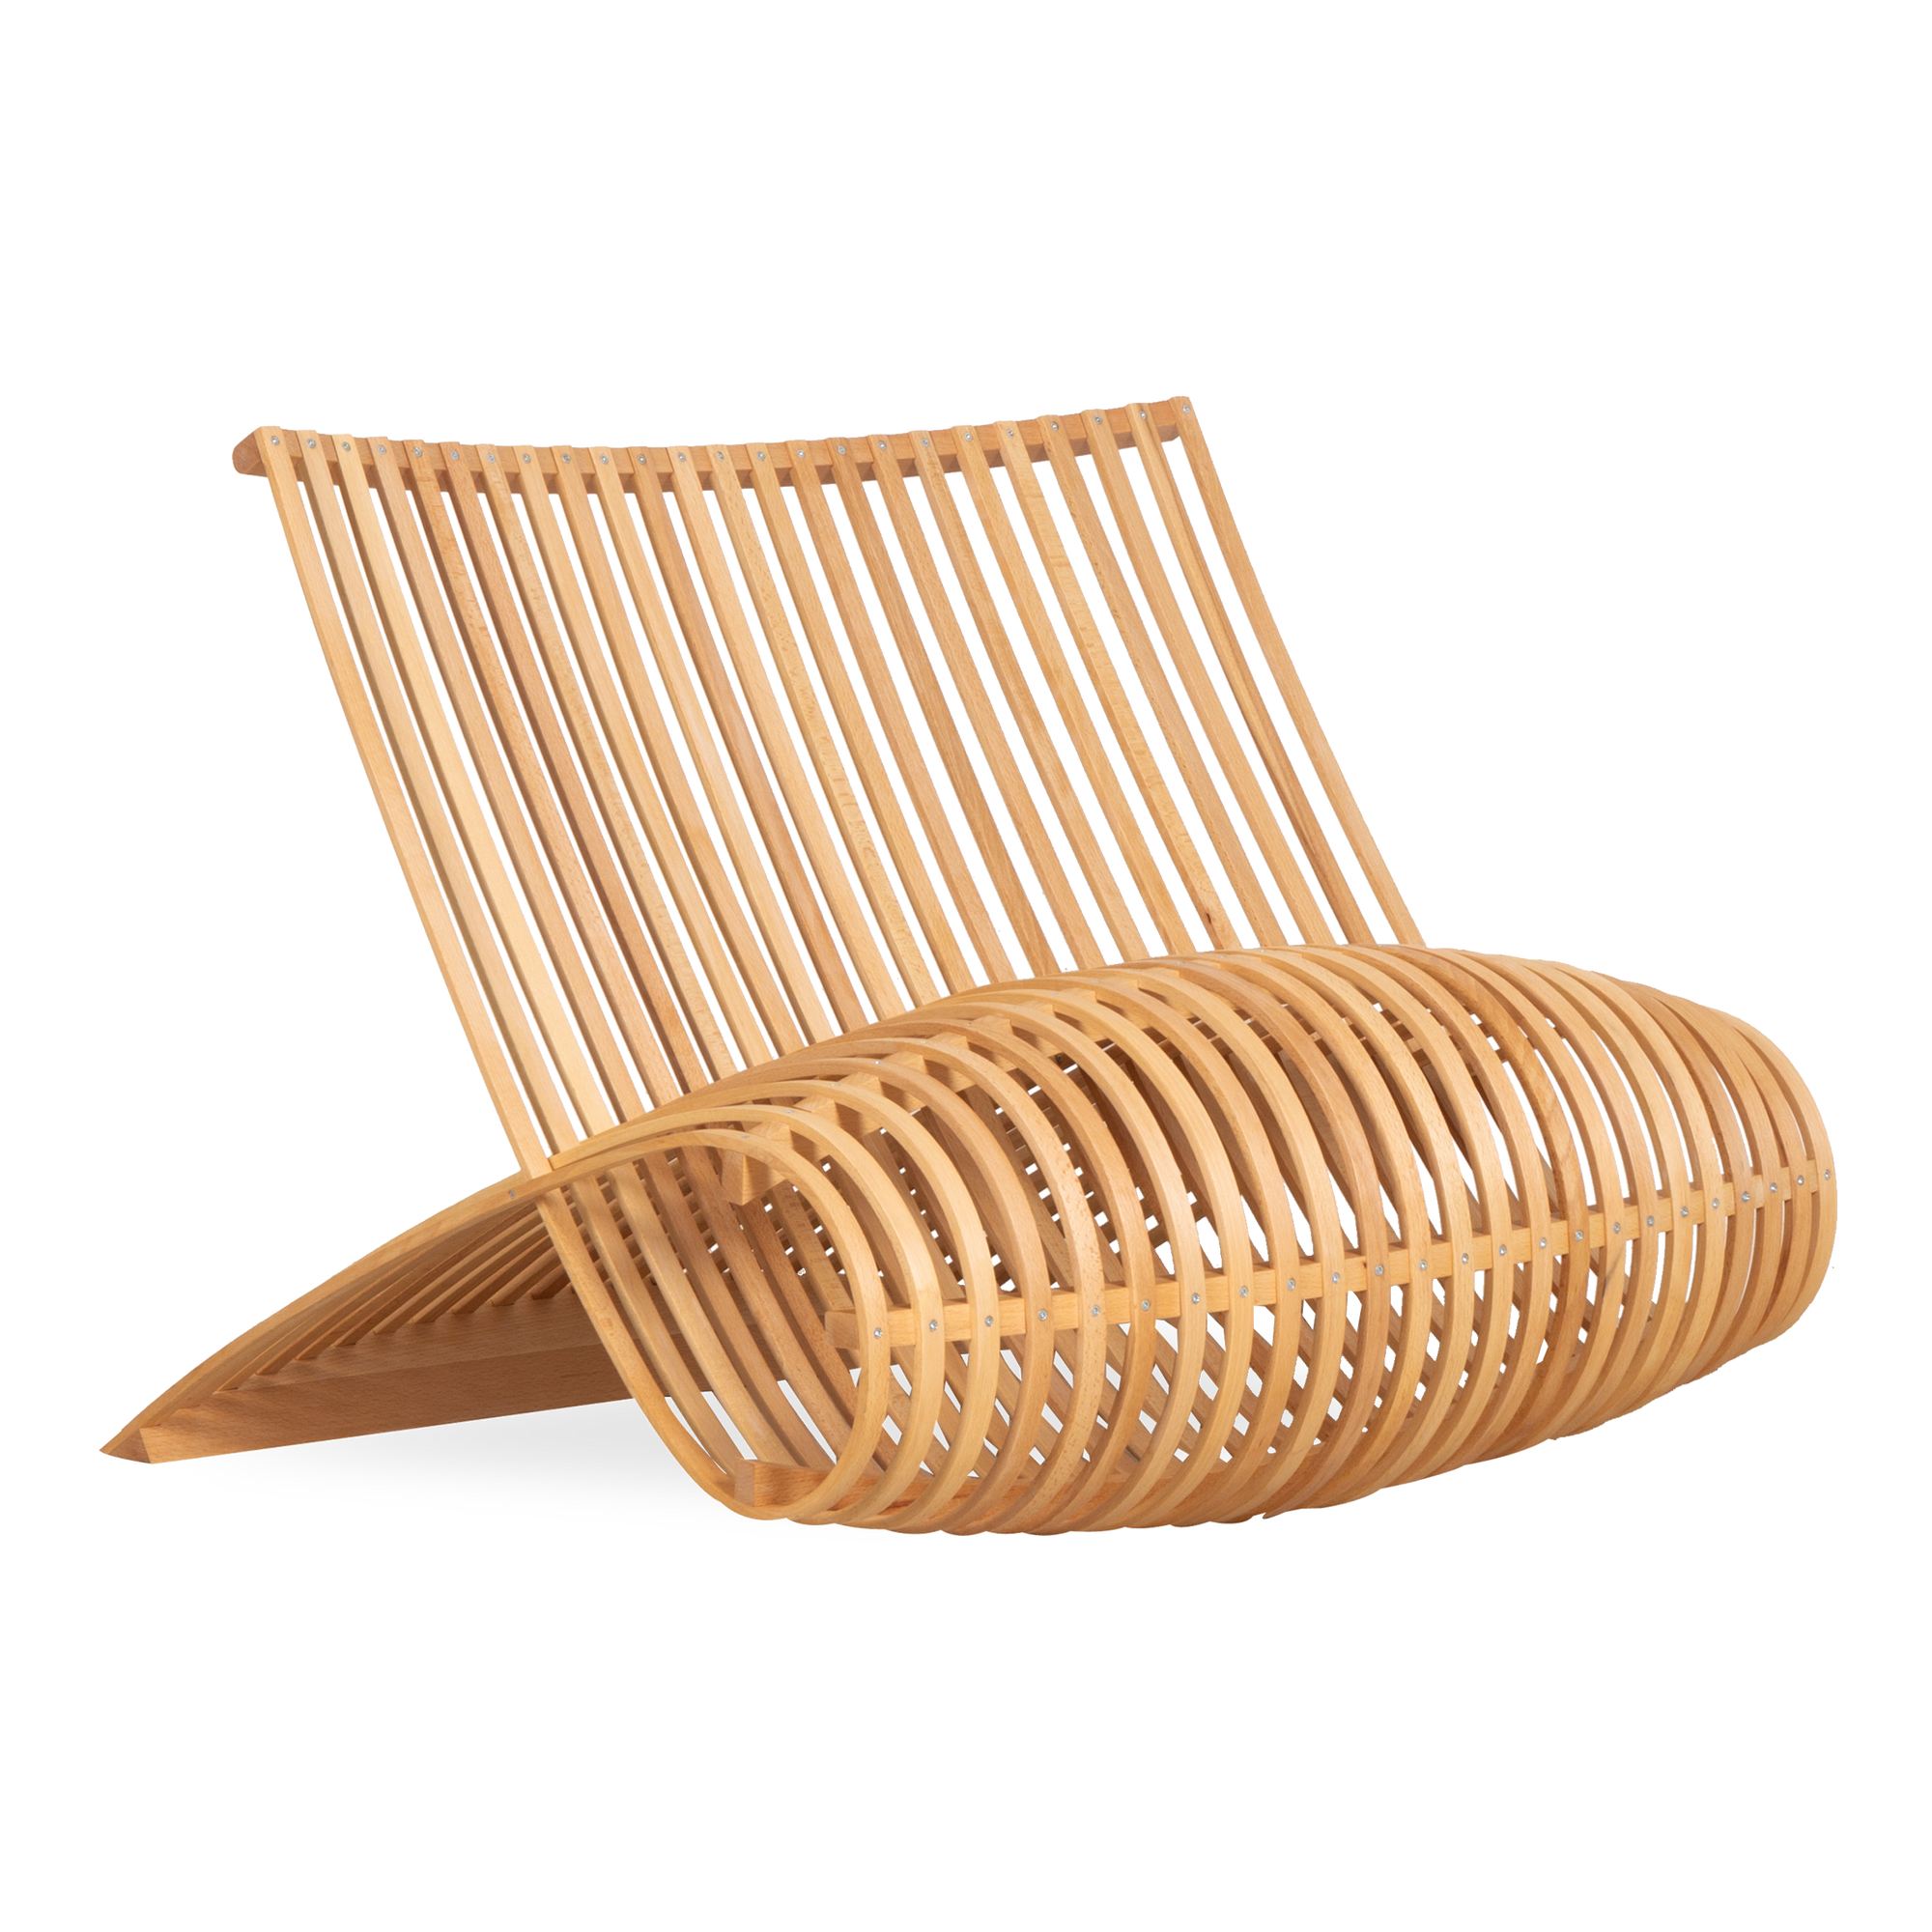 Designed by Marc Newson, the Wooden Chair stands as a successful testament to daring experimentation and a desire to push the manipulation of wood to its limits.